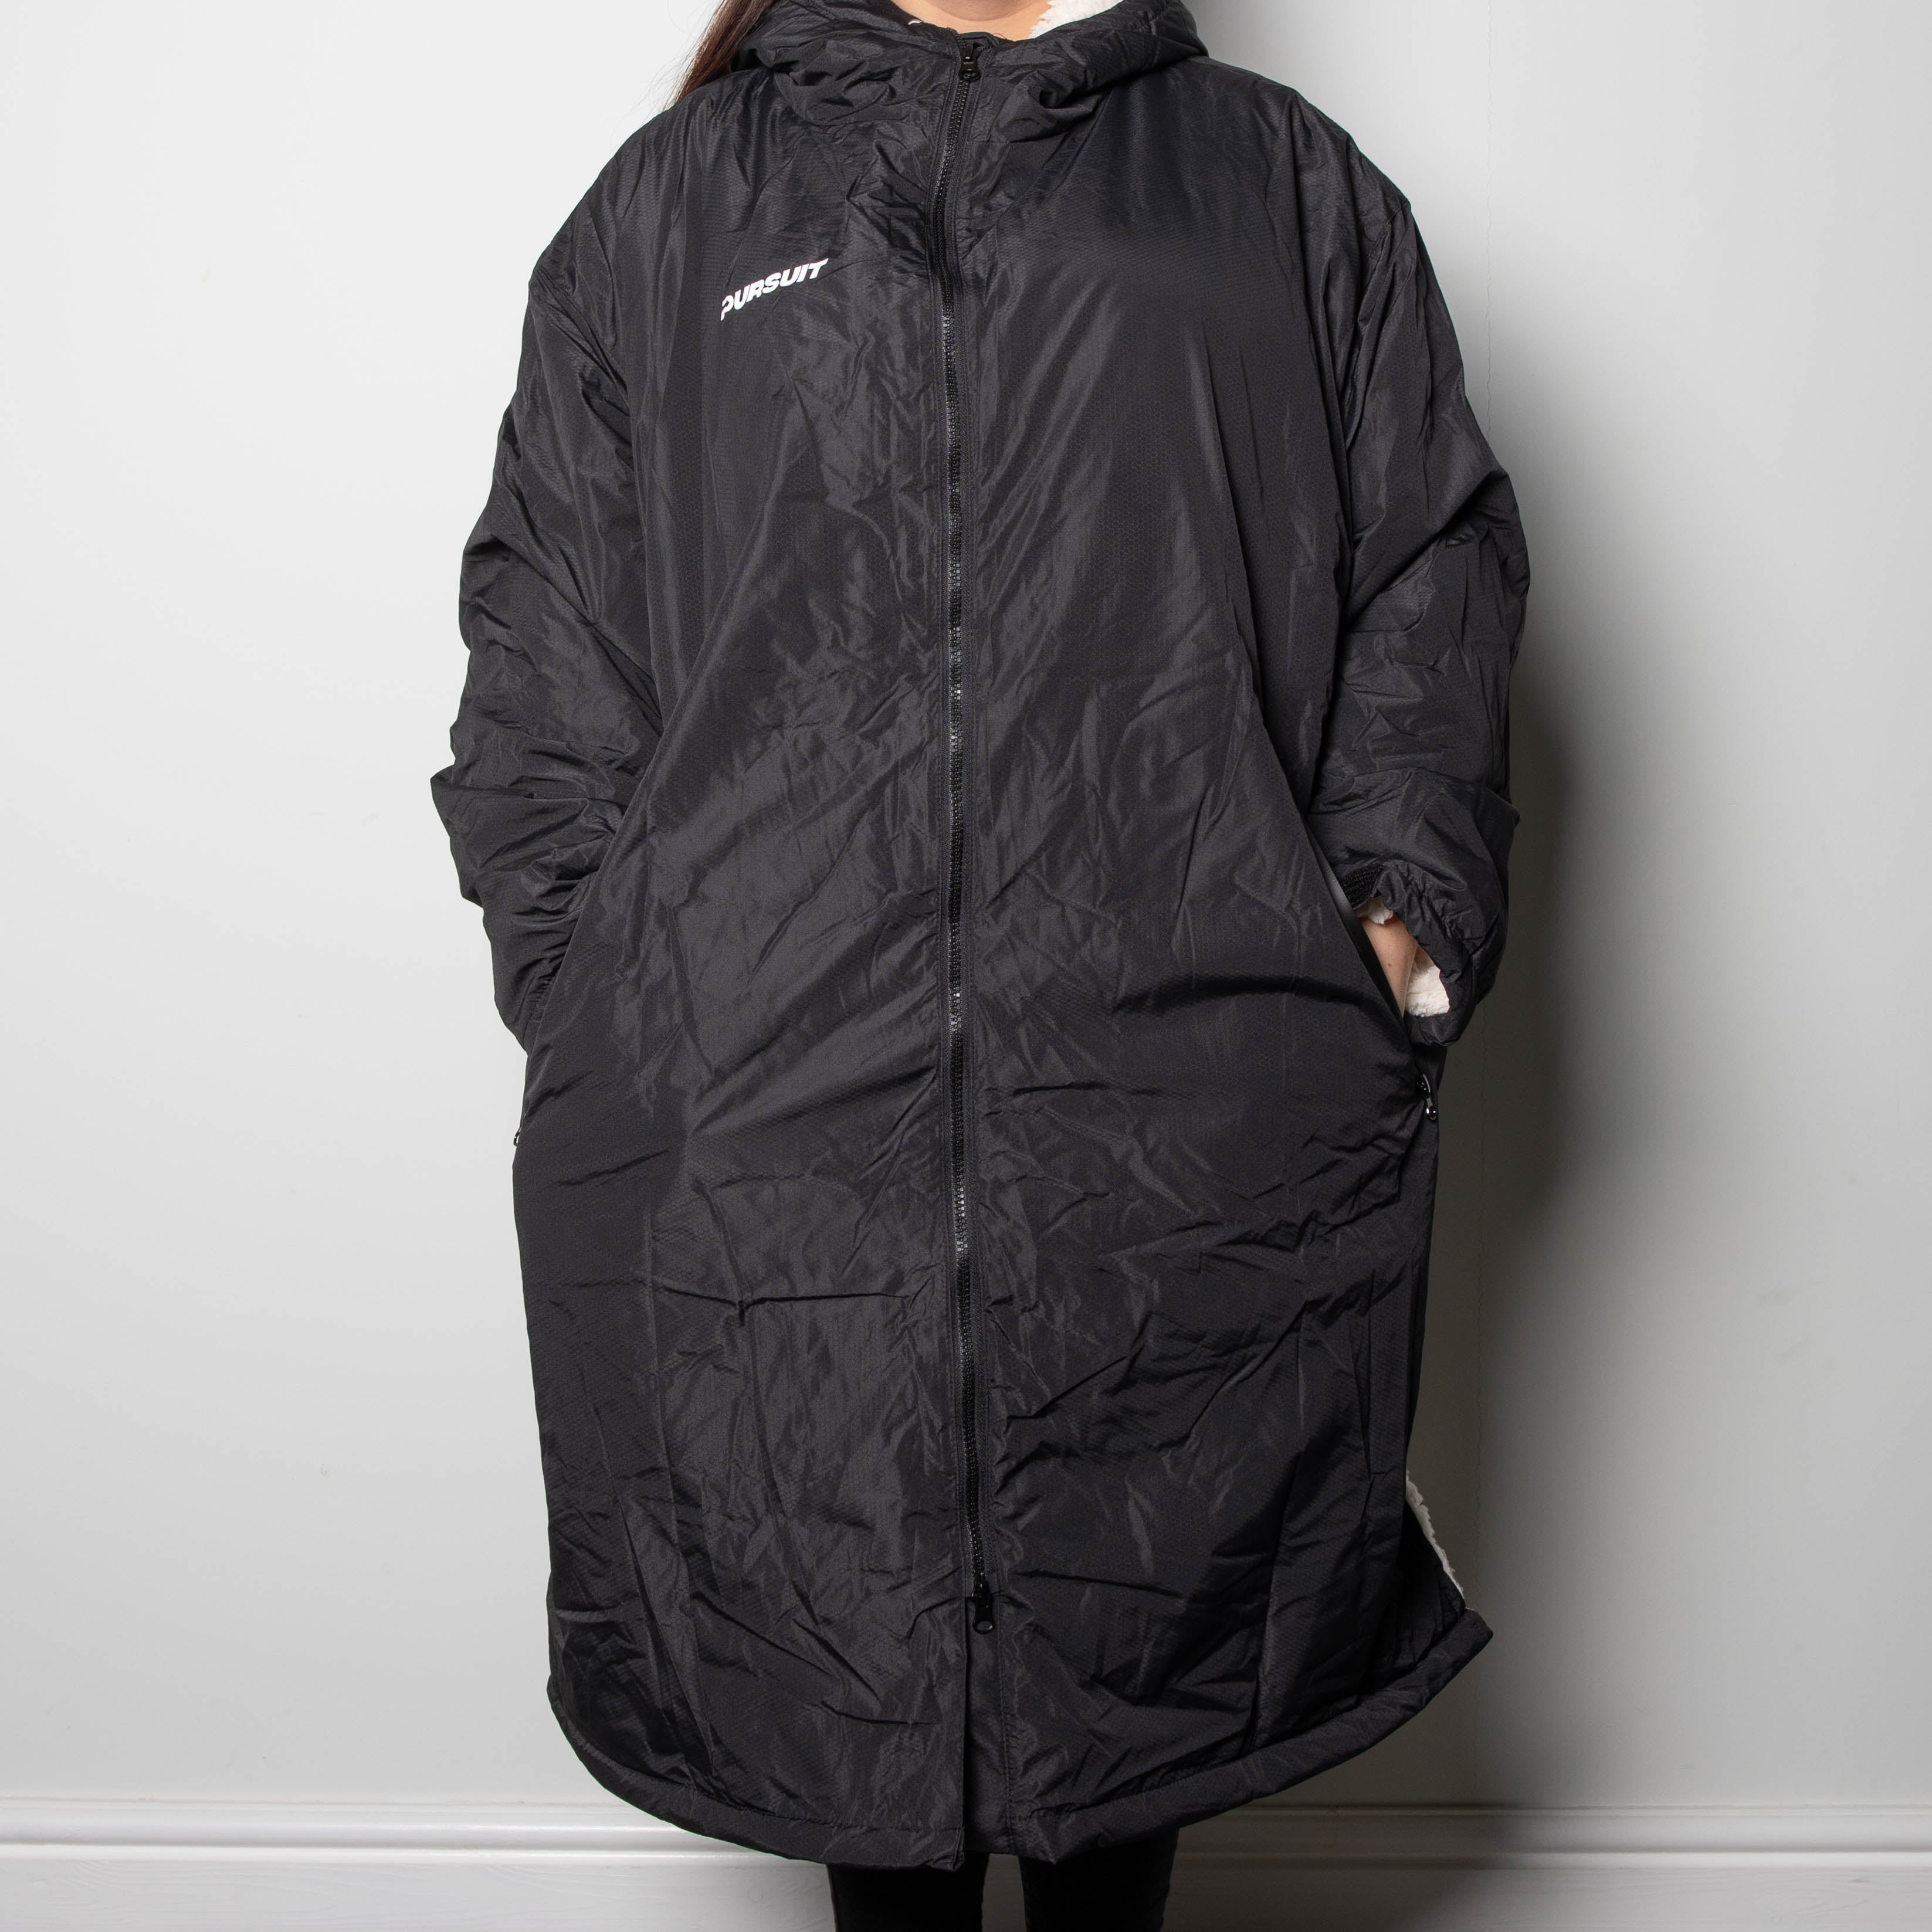 Oversized Adult Waterproof Active Dry Robe with Fleece Lining and Travel Bag in Black